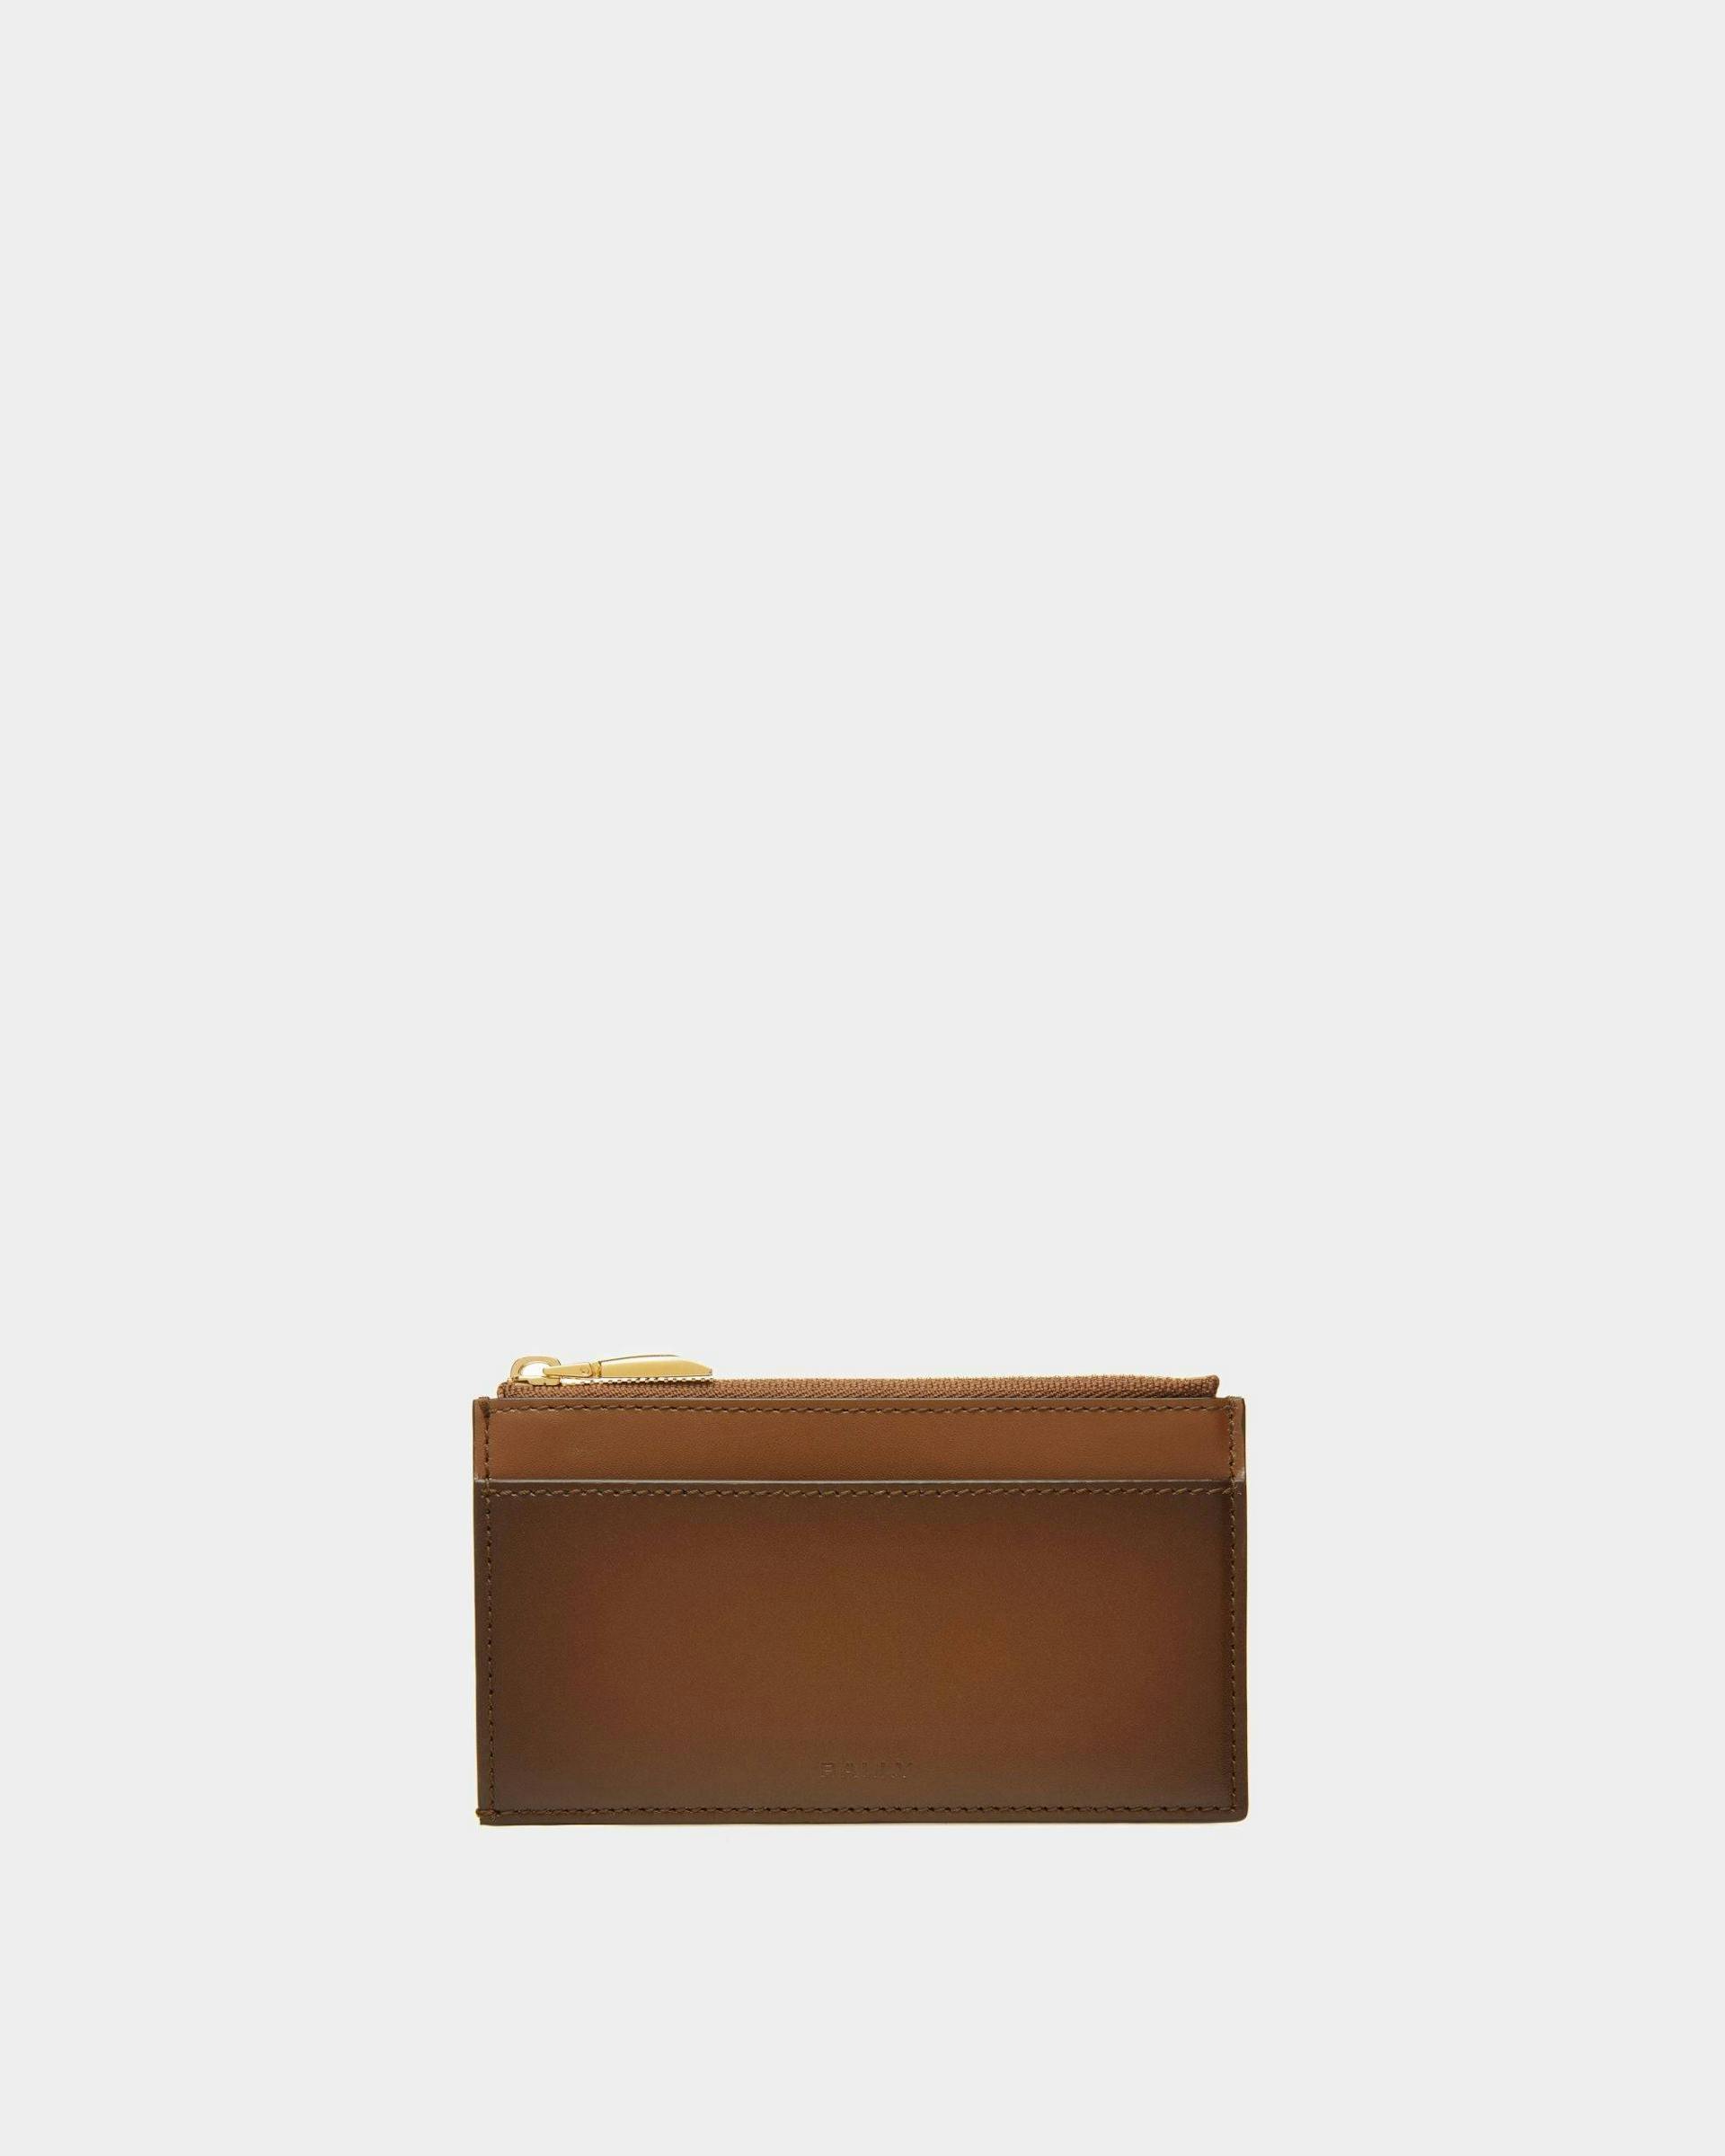 Speciale Card Holder - Bally